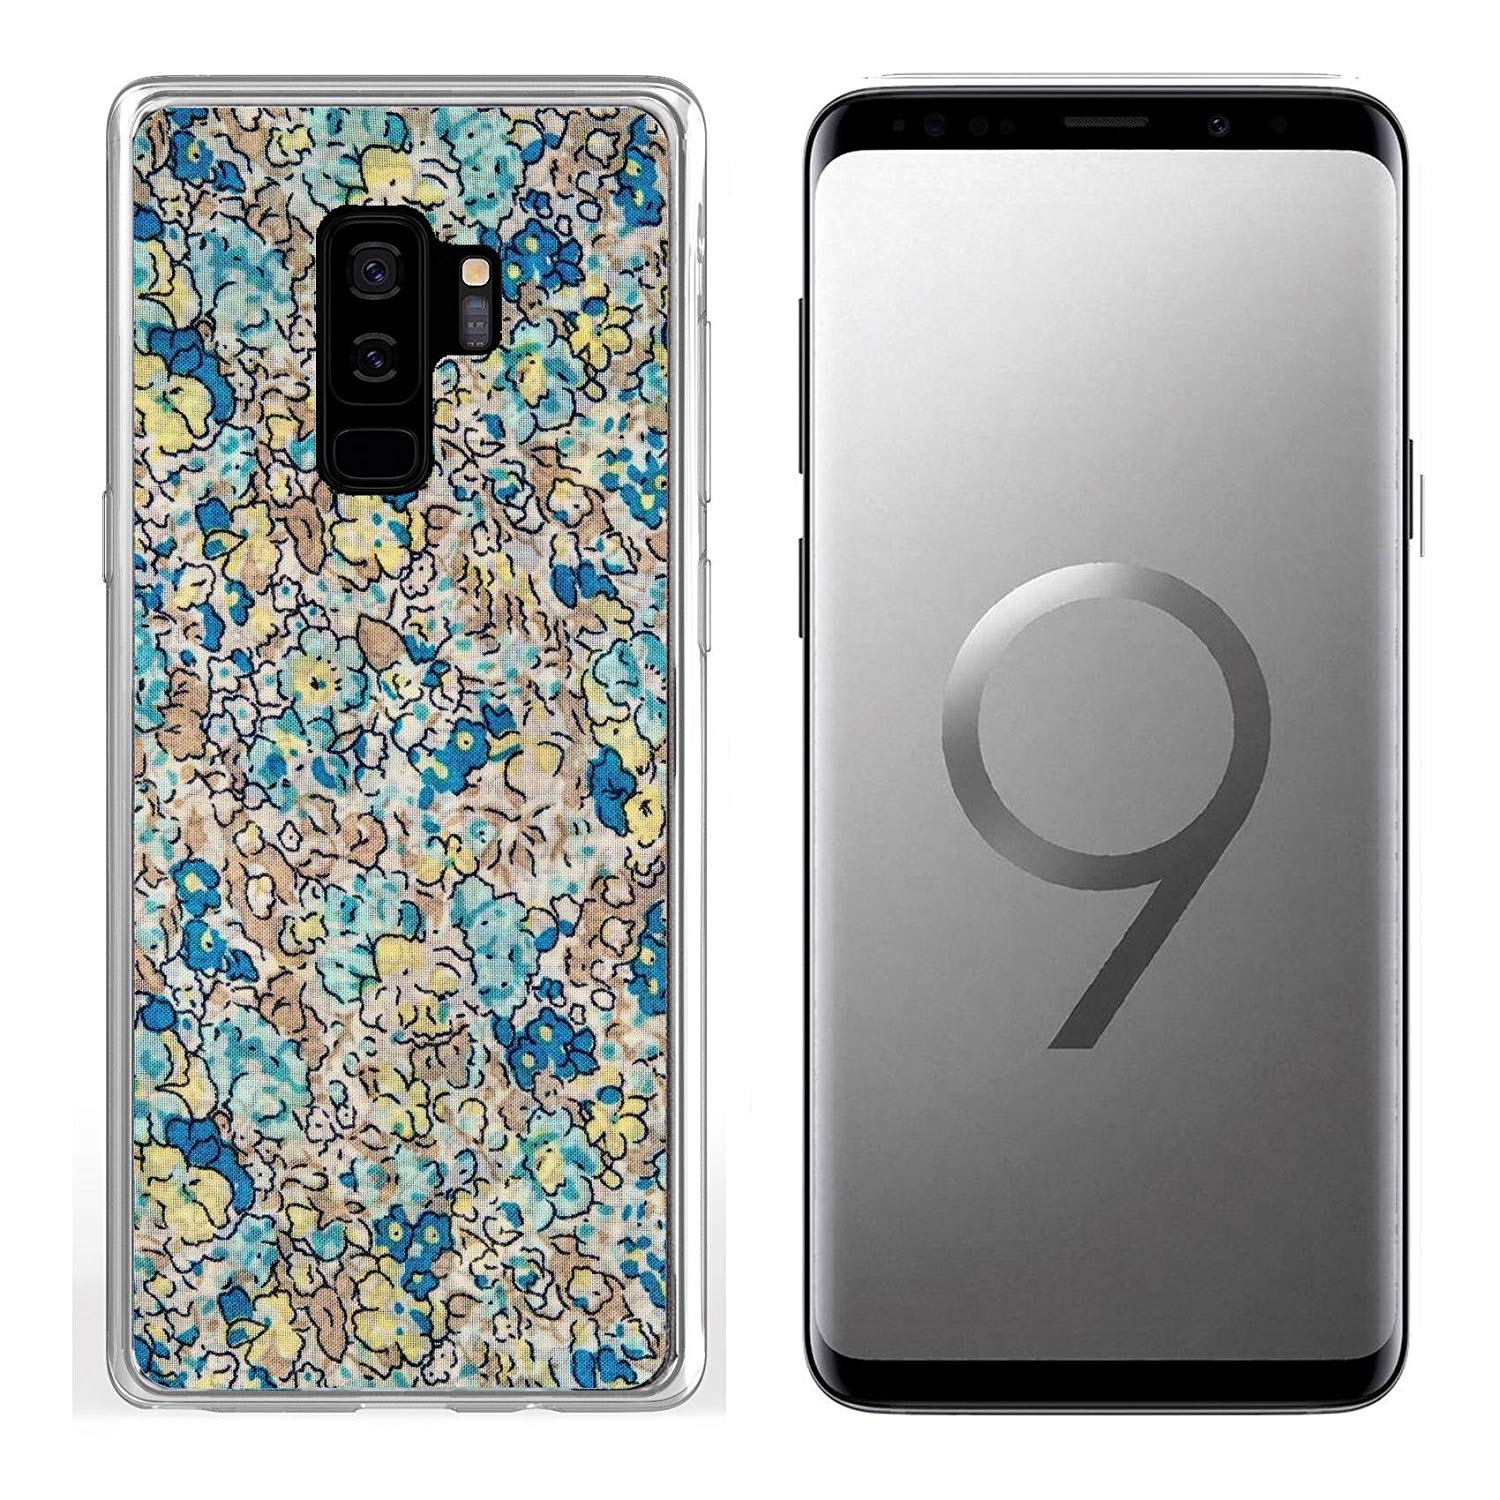 Luxlady Samsung Galaxy S9 Plus Clear Case Soft Tpu - Iphone , HD Wallpaper & Backgrounds